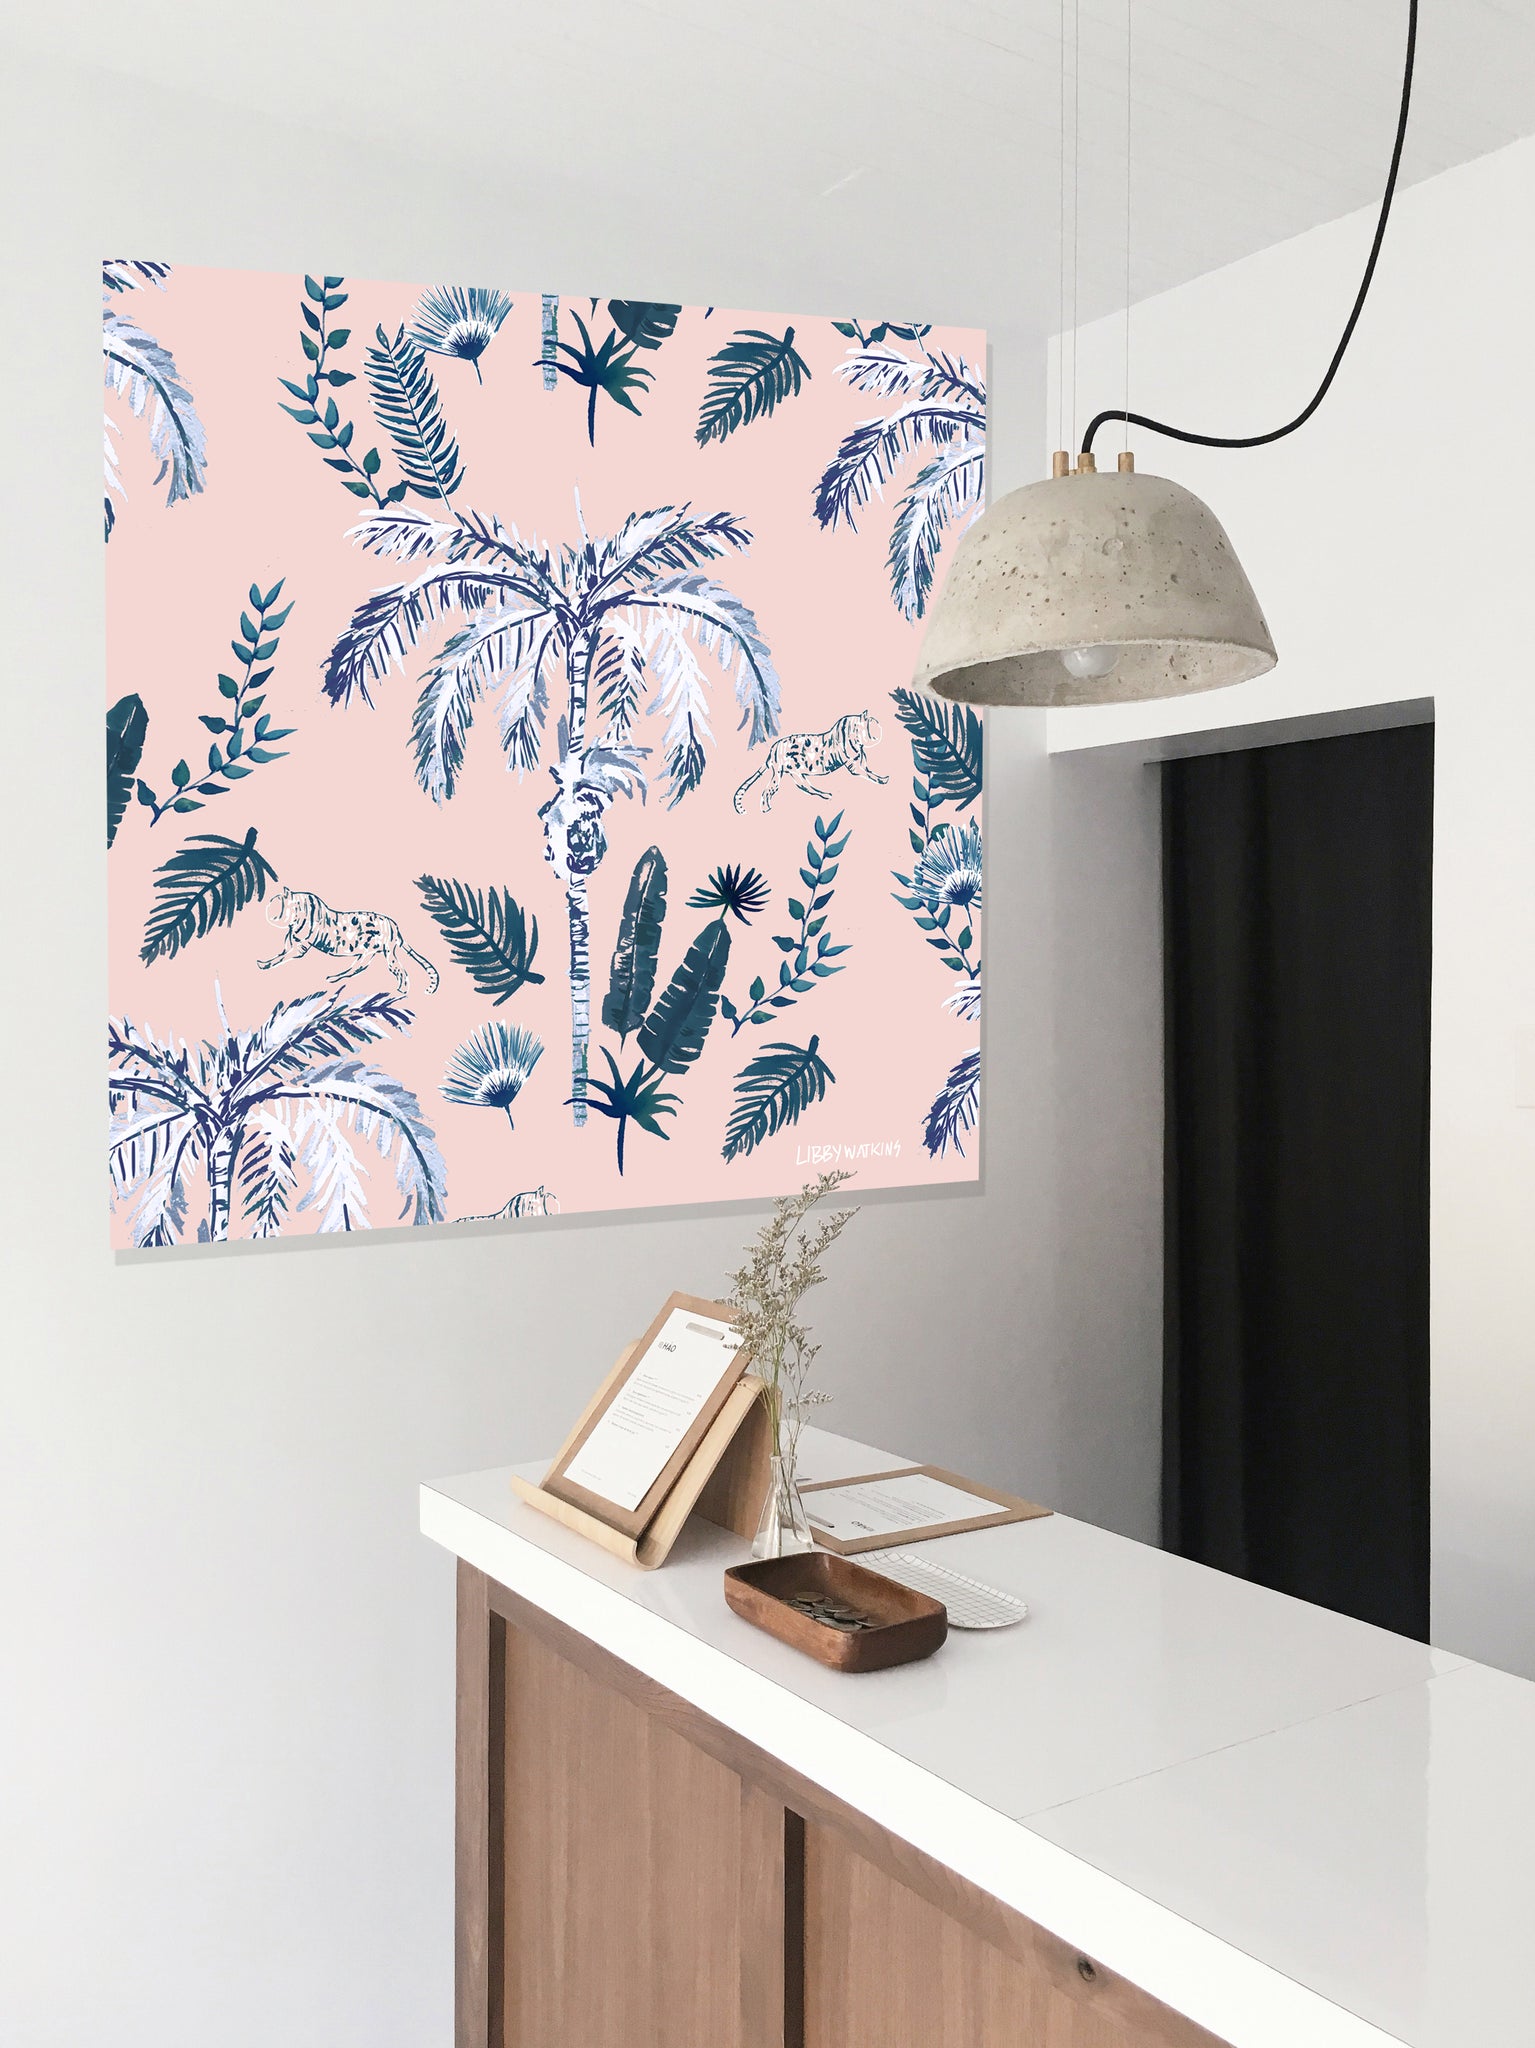 Ink Palm in Pink Canvas Prints